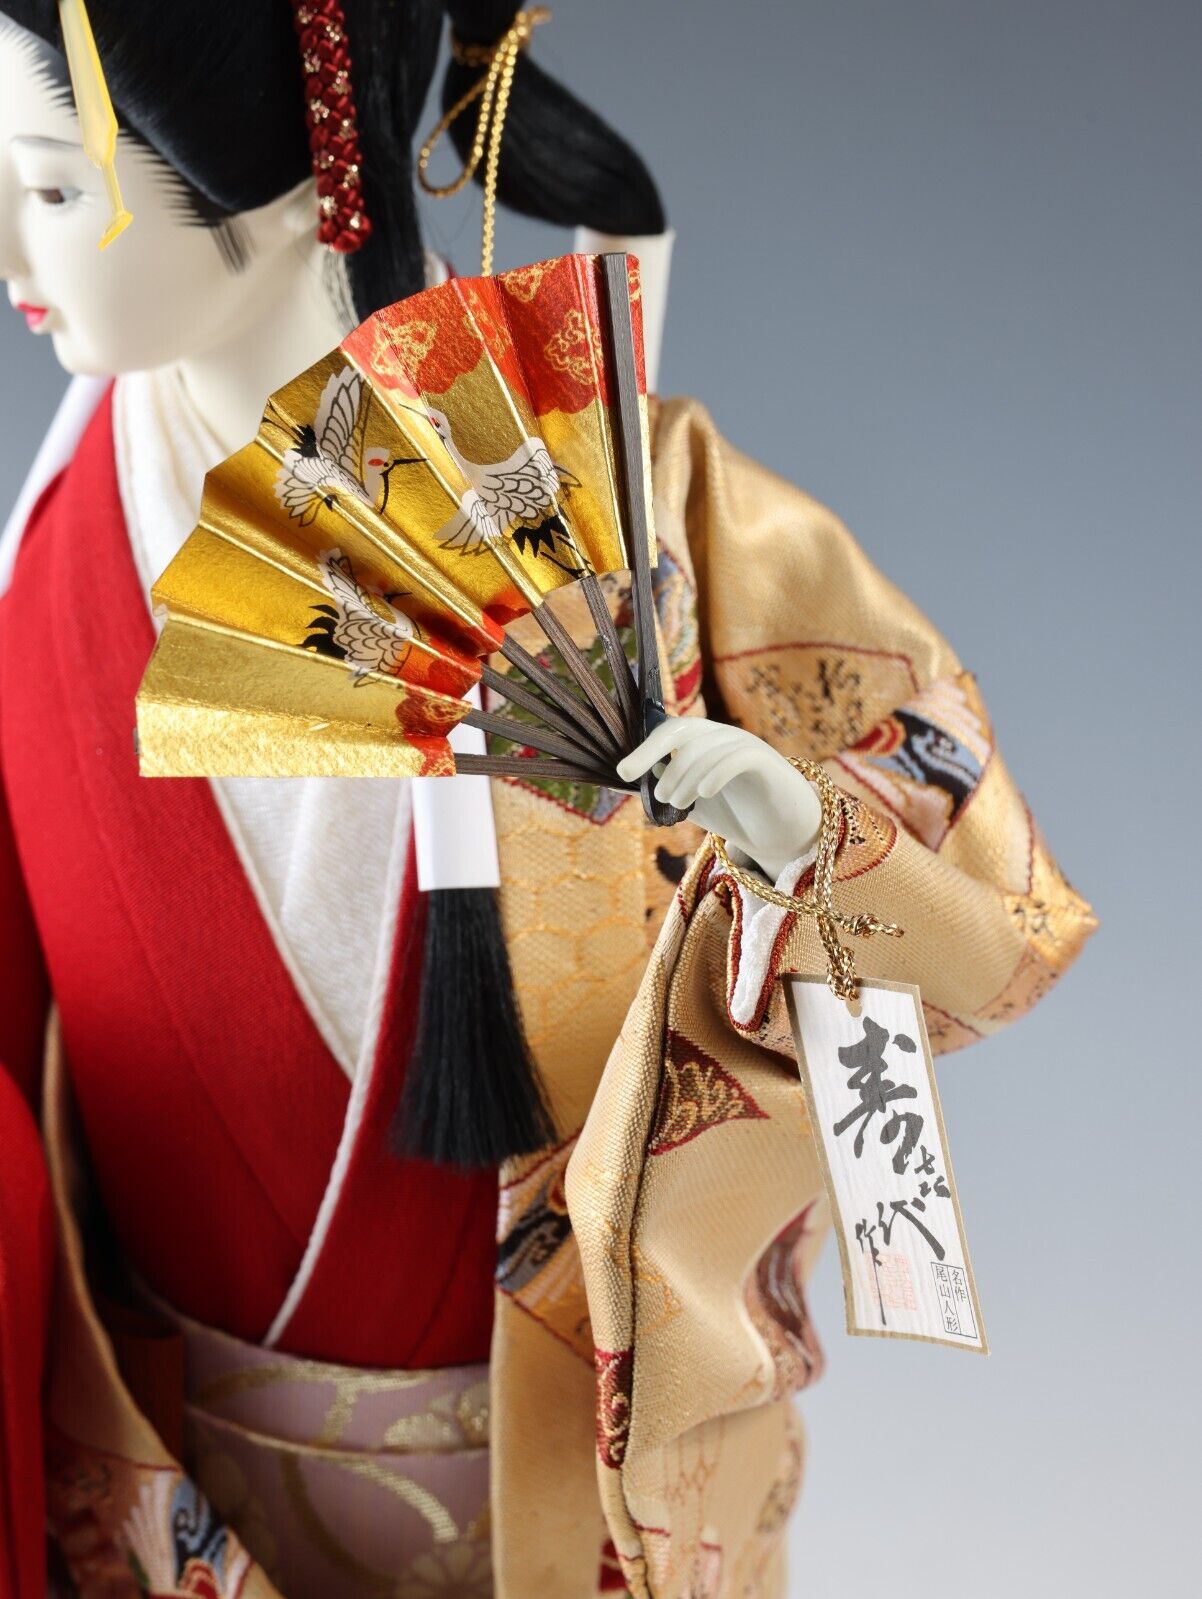 Collectible Vintage Japanese Geisha Doll in Traditional Kimono with Fan Showa Era.